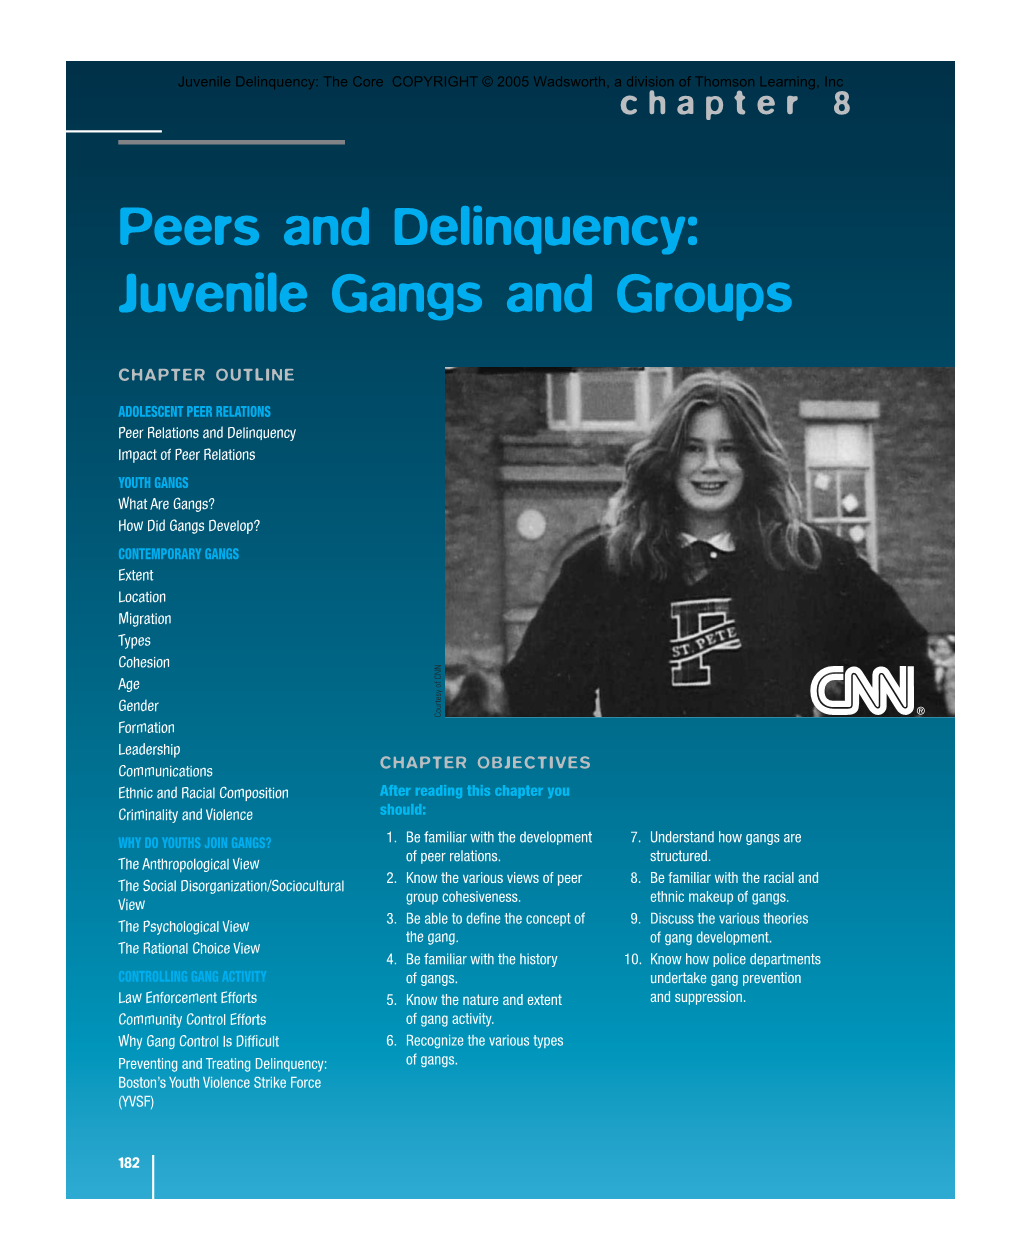 Peers and Delinquency: Juvenile Gangs and Groups